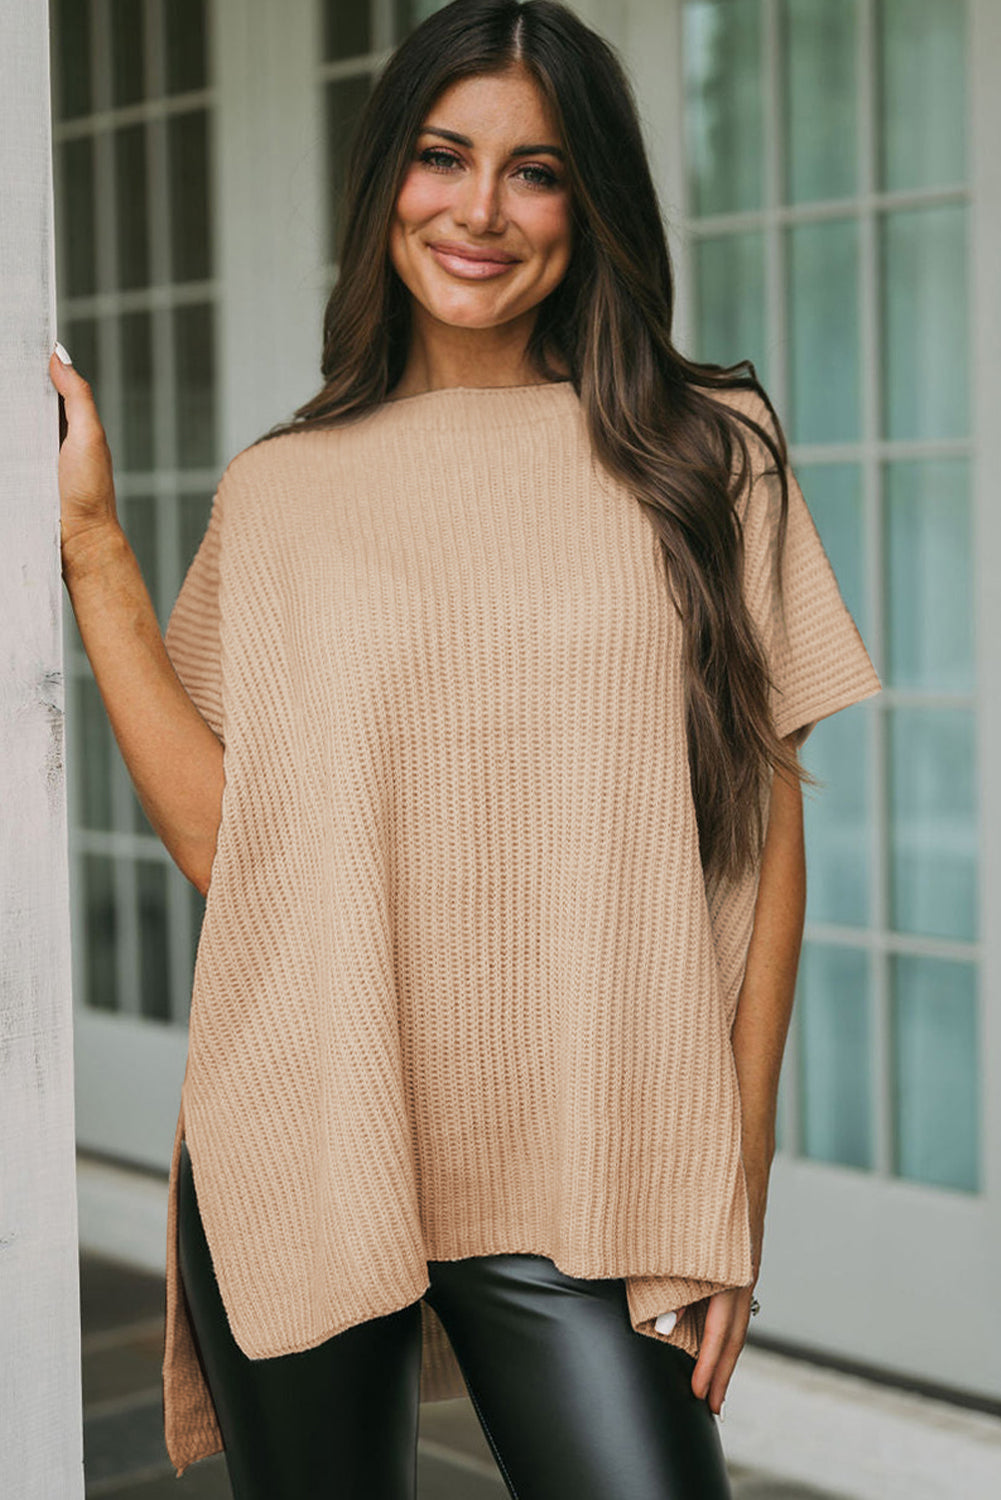 Textured Knit Draped Short Sleeve Tunic Sweater Top